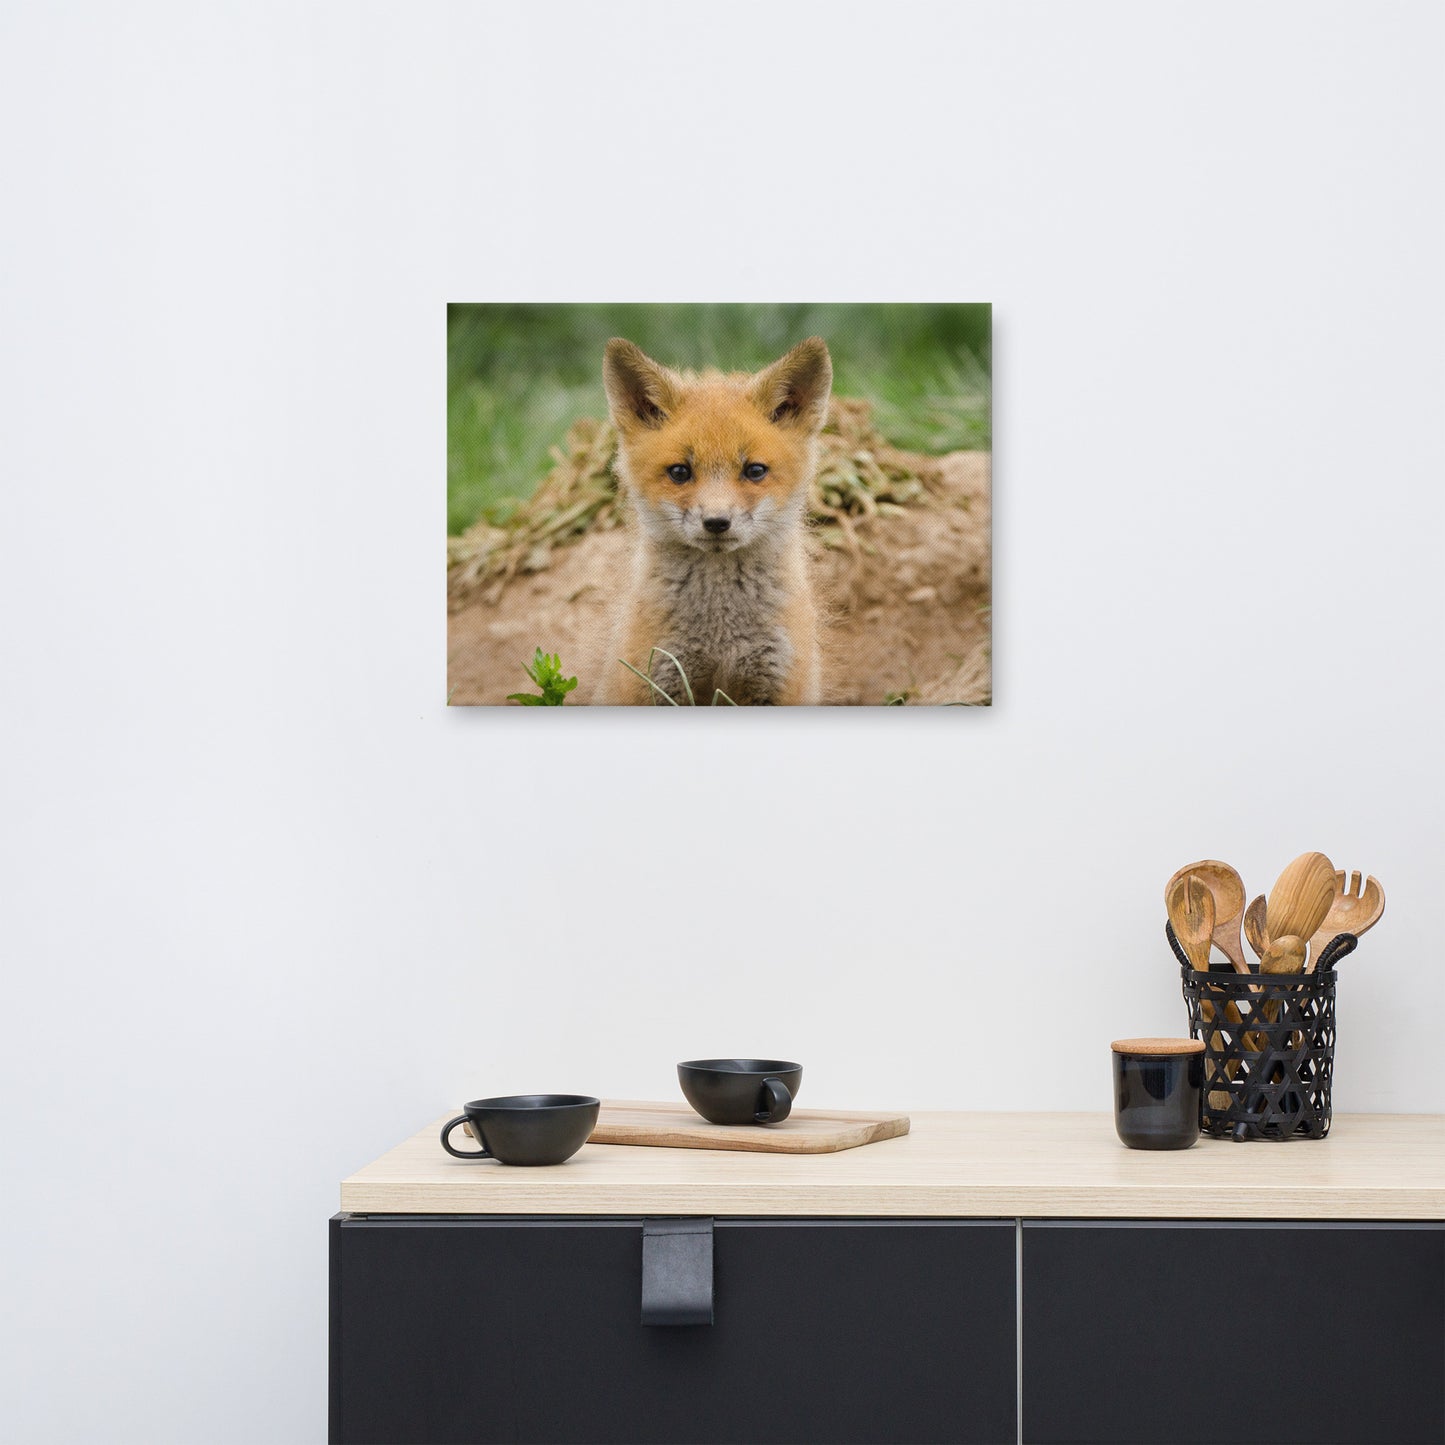 Modern Wall Decor Dining Room: Young Red Fox Kit Popping Out of Den- Wildlife / Animal / Nature Photograph Canvas Wall Art Print - Artwork